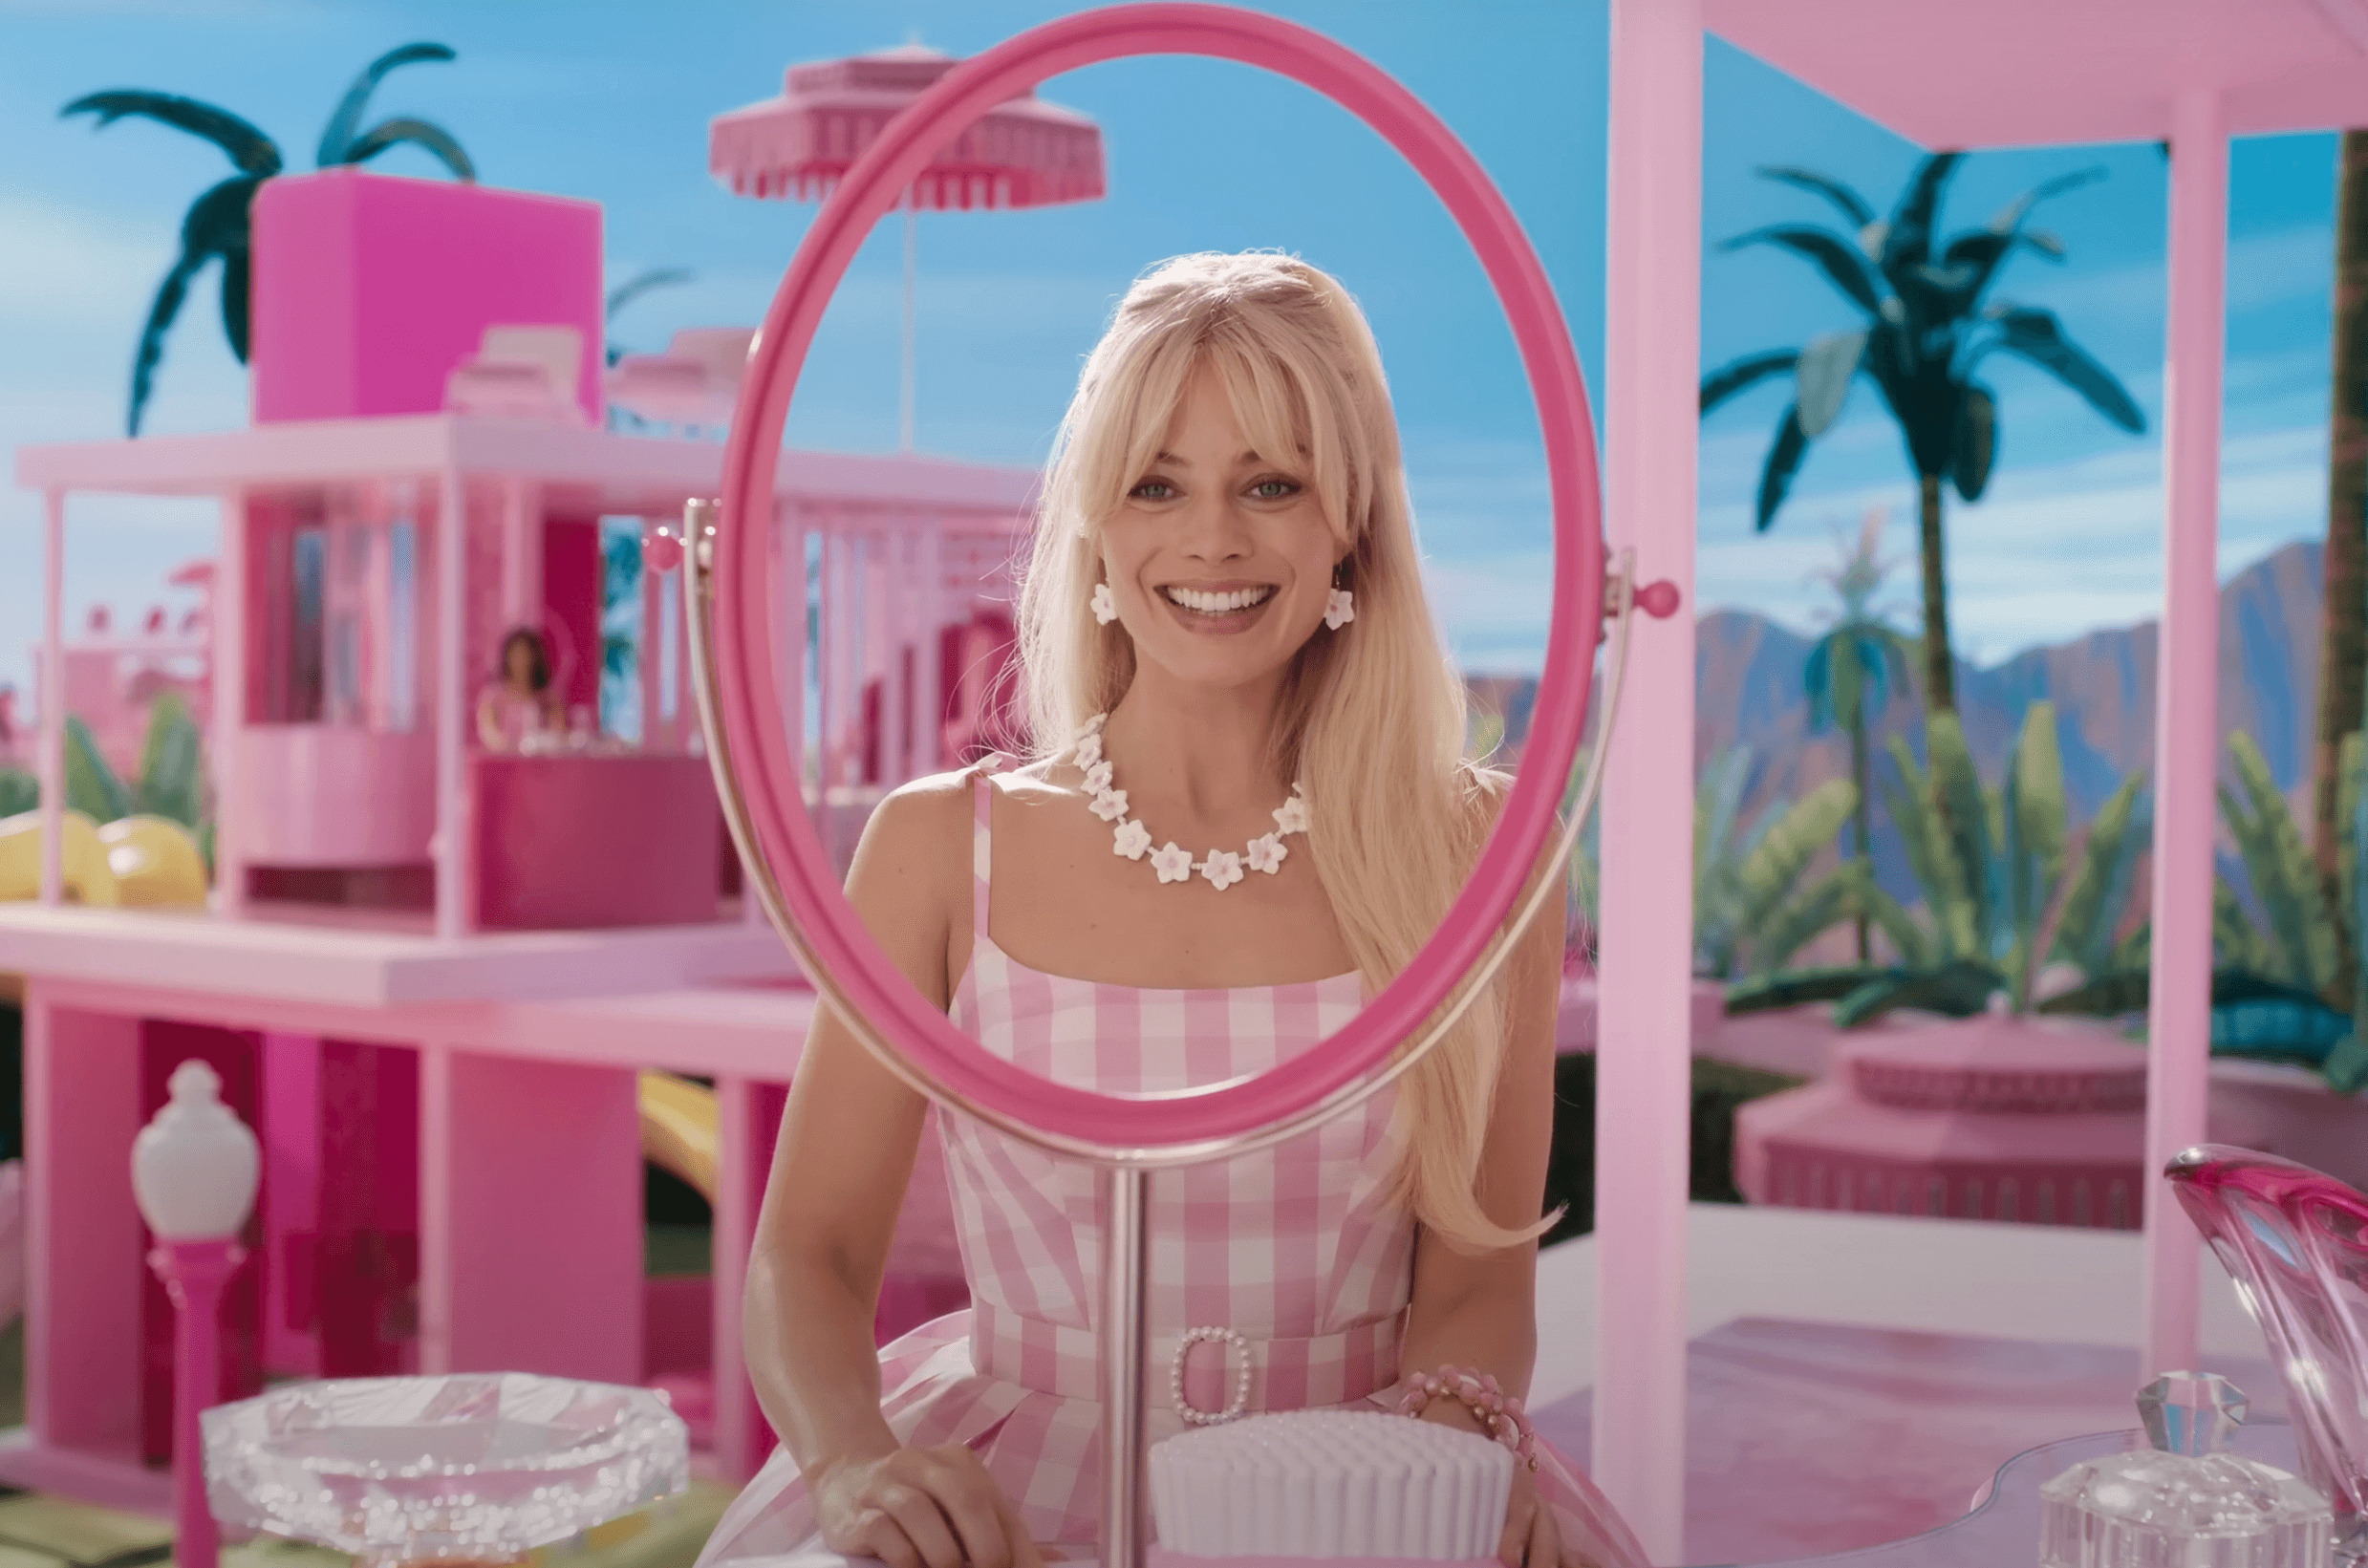 Margot Robbie as Barbie stands at a pink table with the outline of a mirror around her face